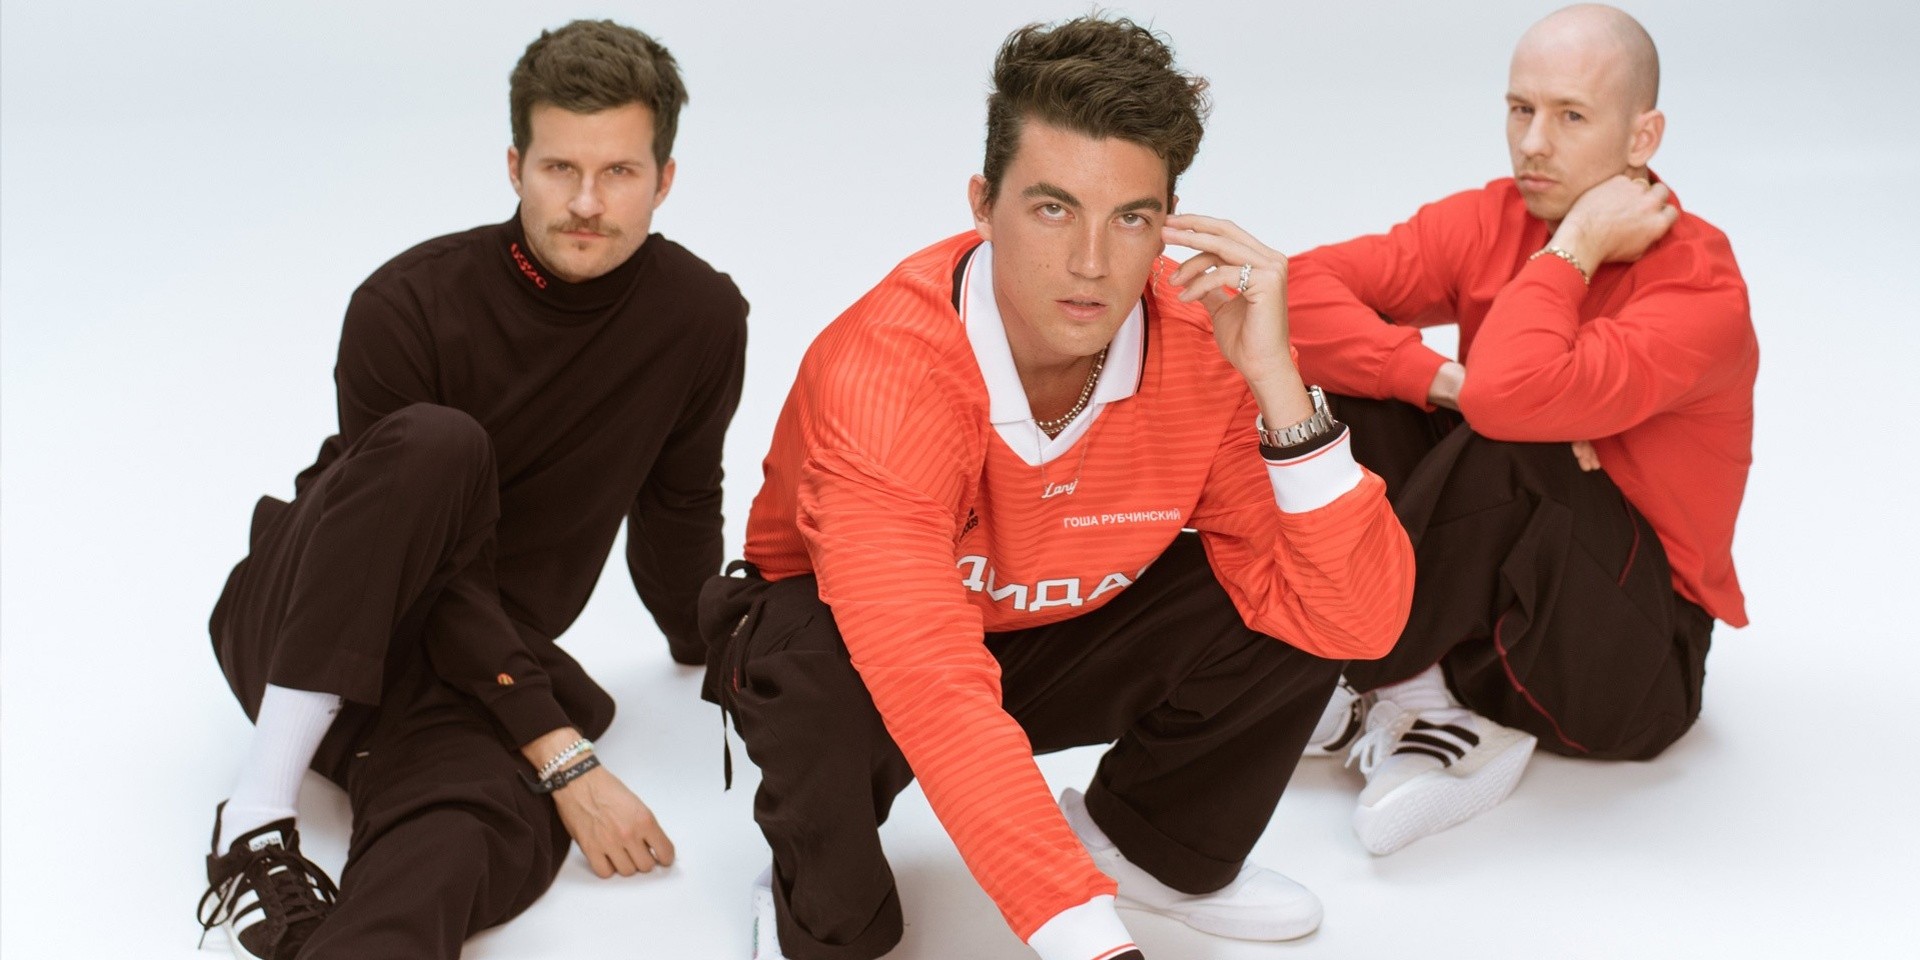 LANY drop lyric video for new hopeful single 'Thru These Tears' – watch